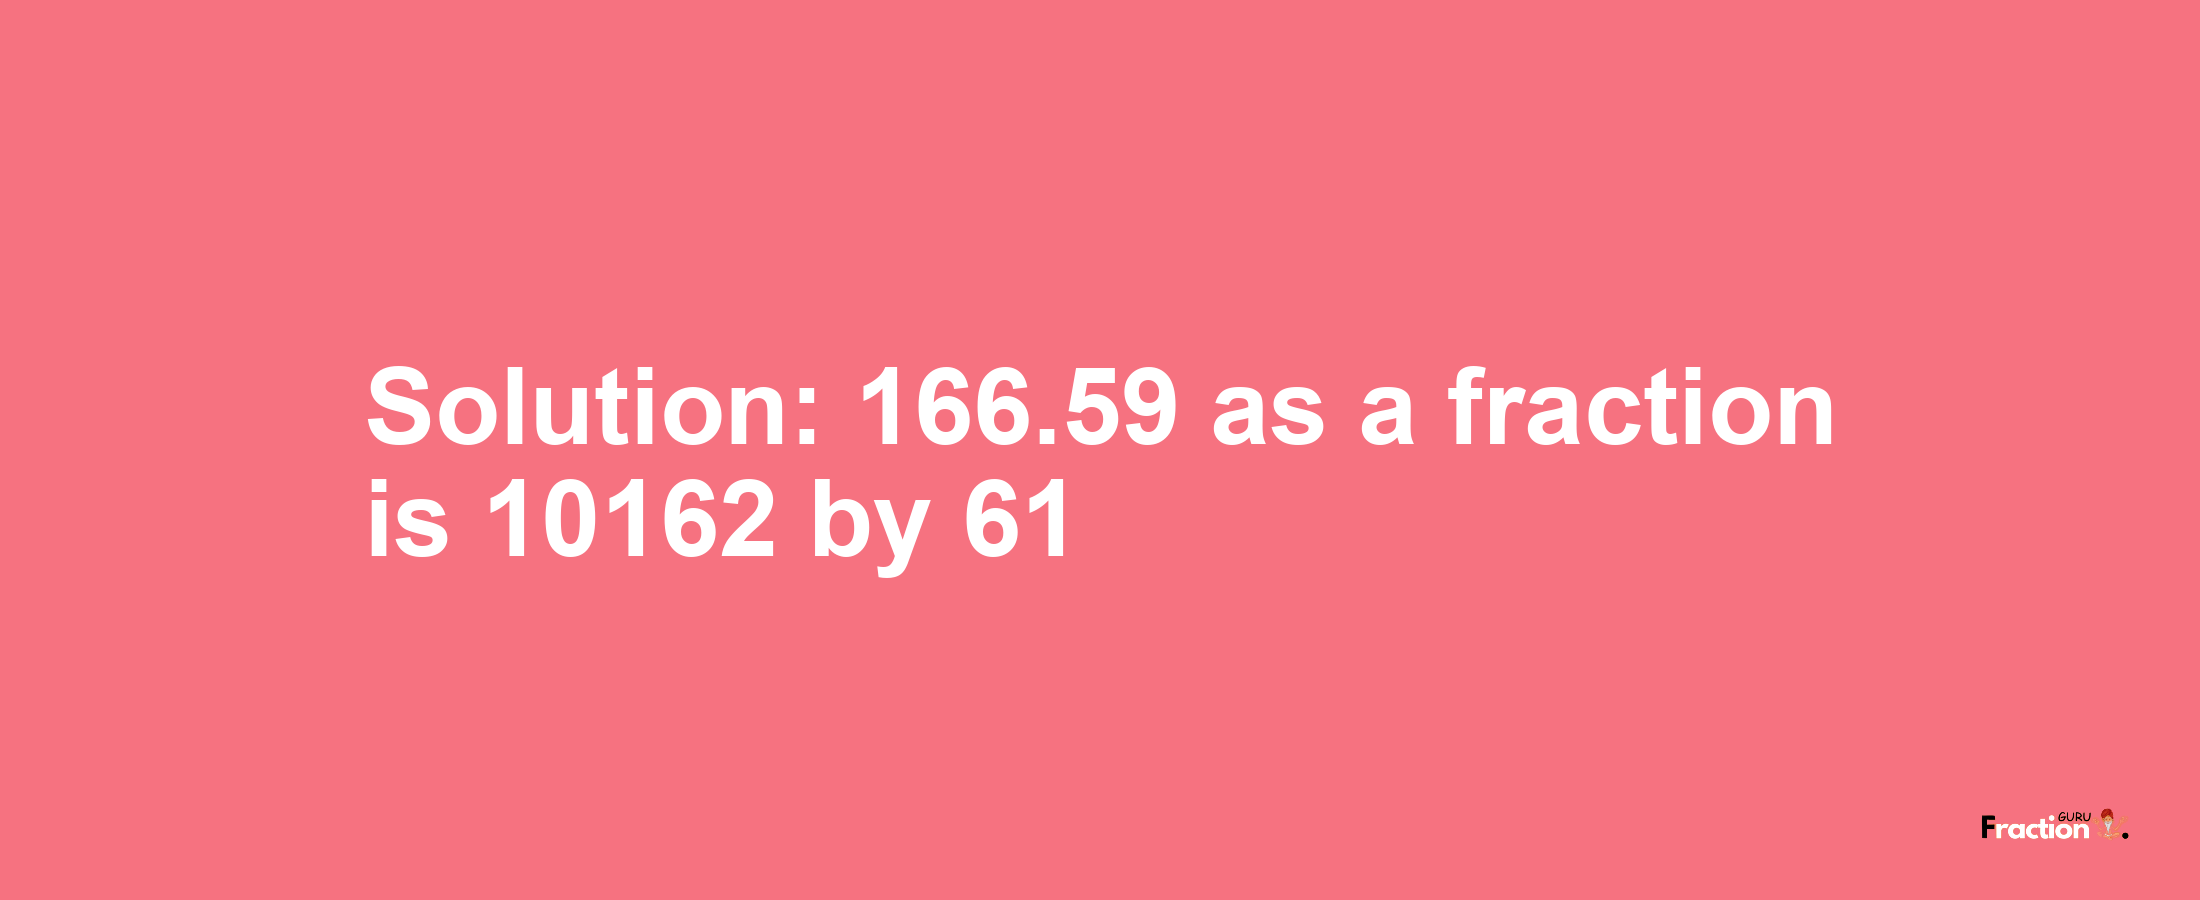 Solution:166.59 as a fraction is 10162/61